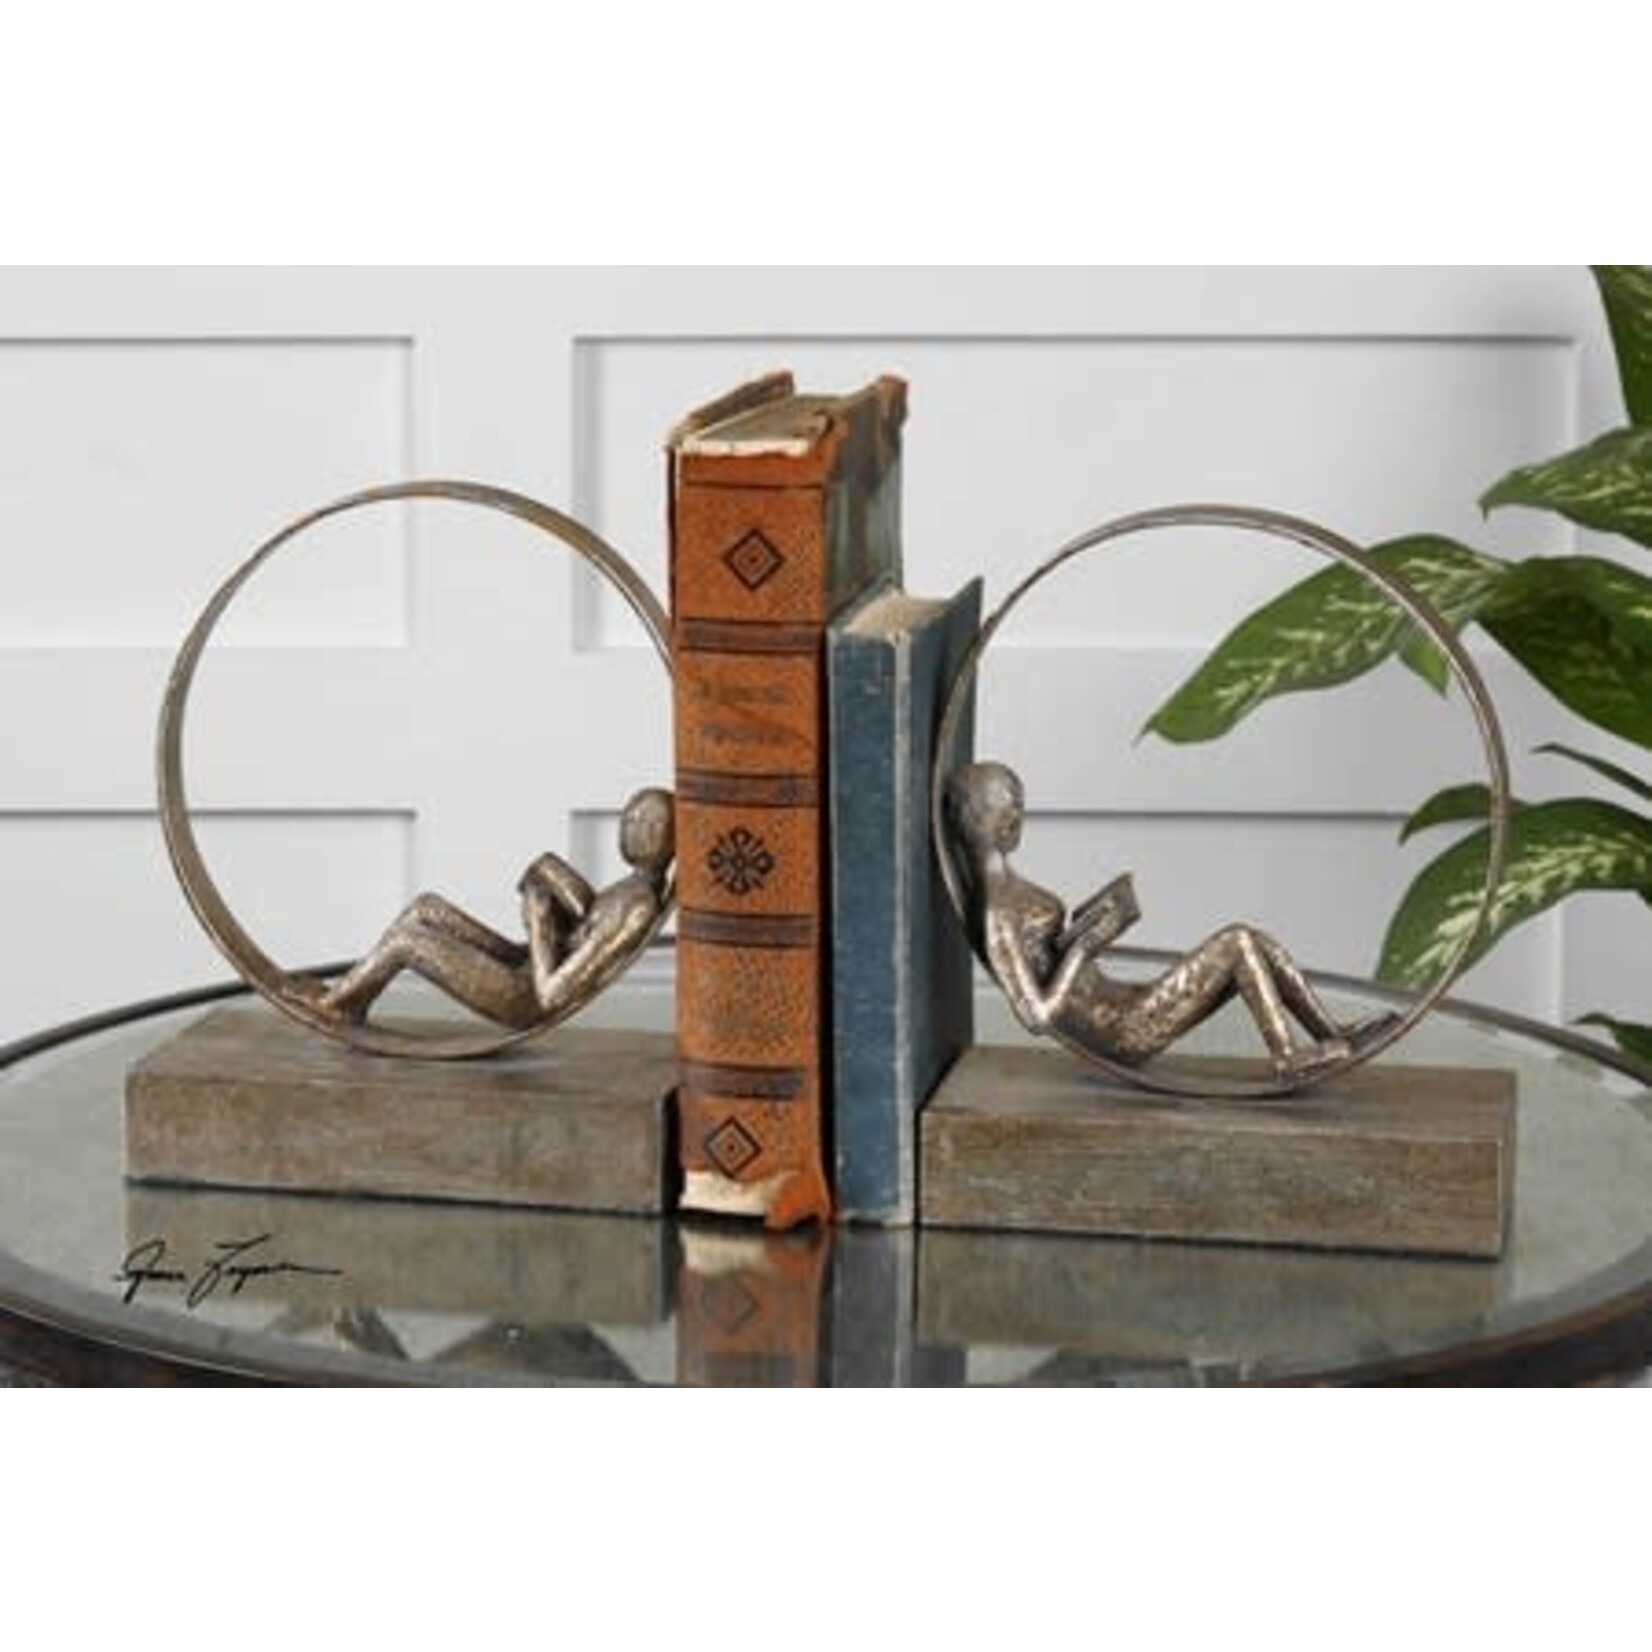 UTTERMOST LOUNGING BOOK ENDS S/2